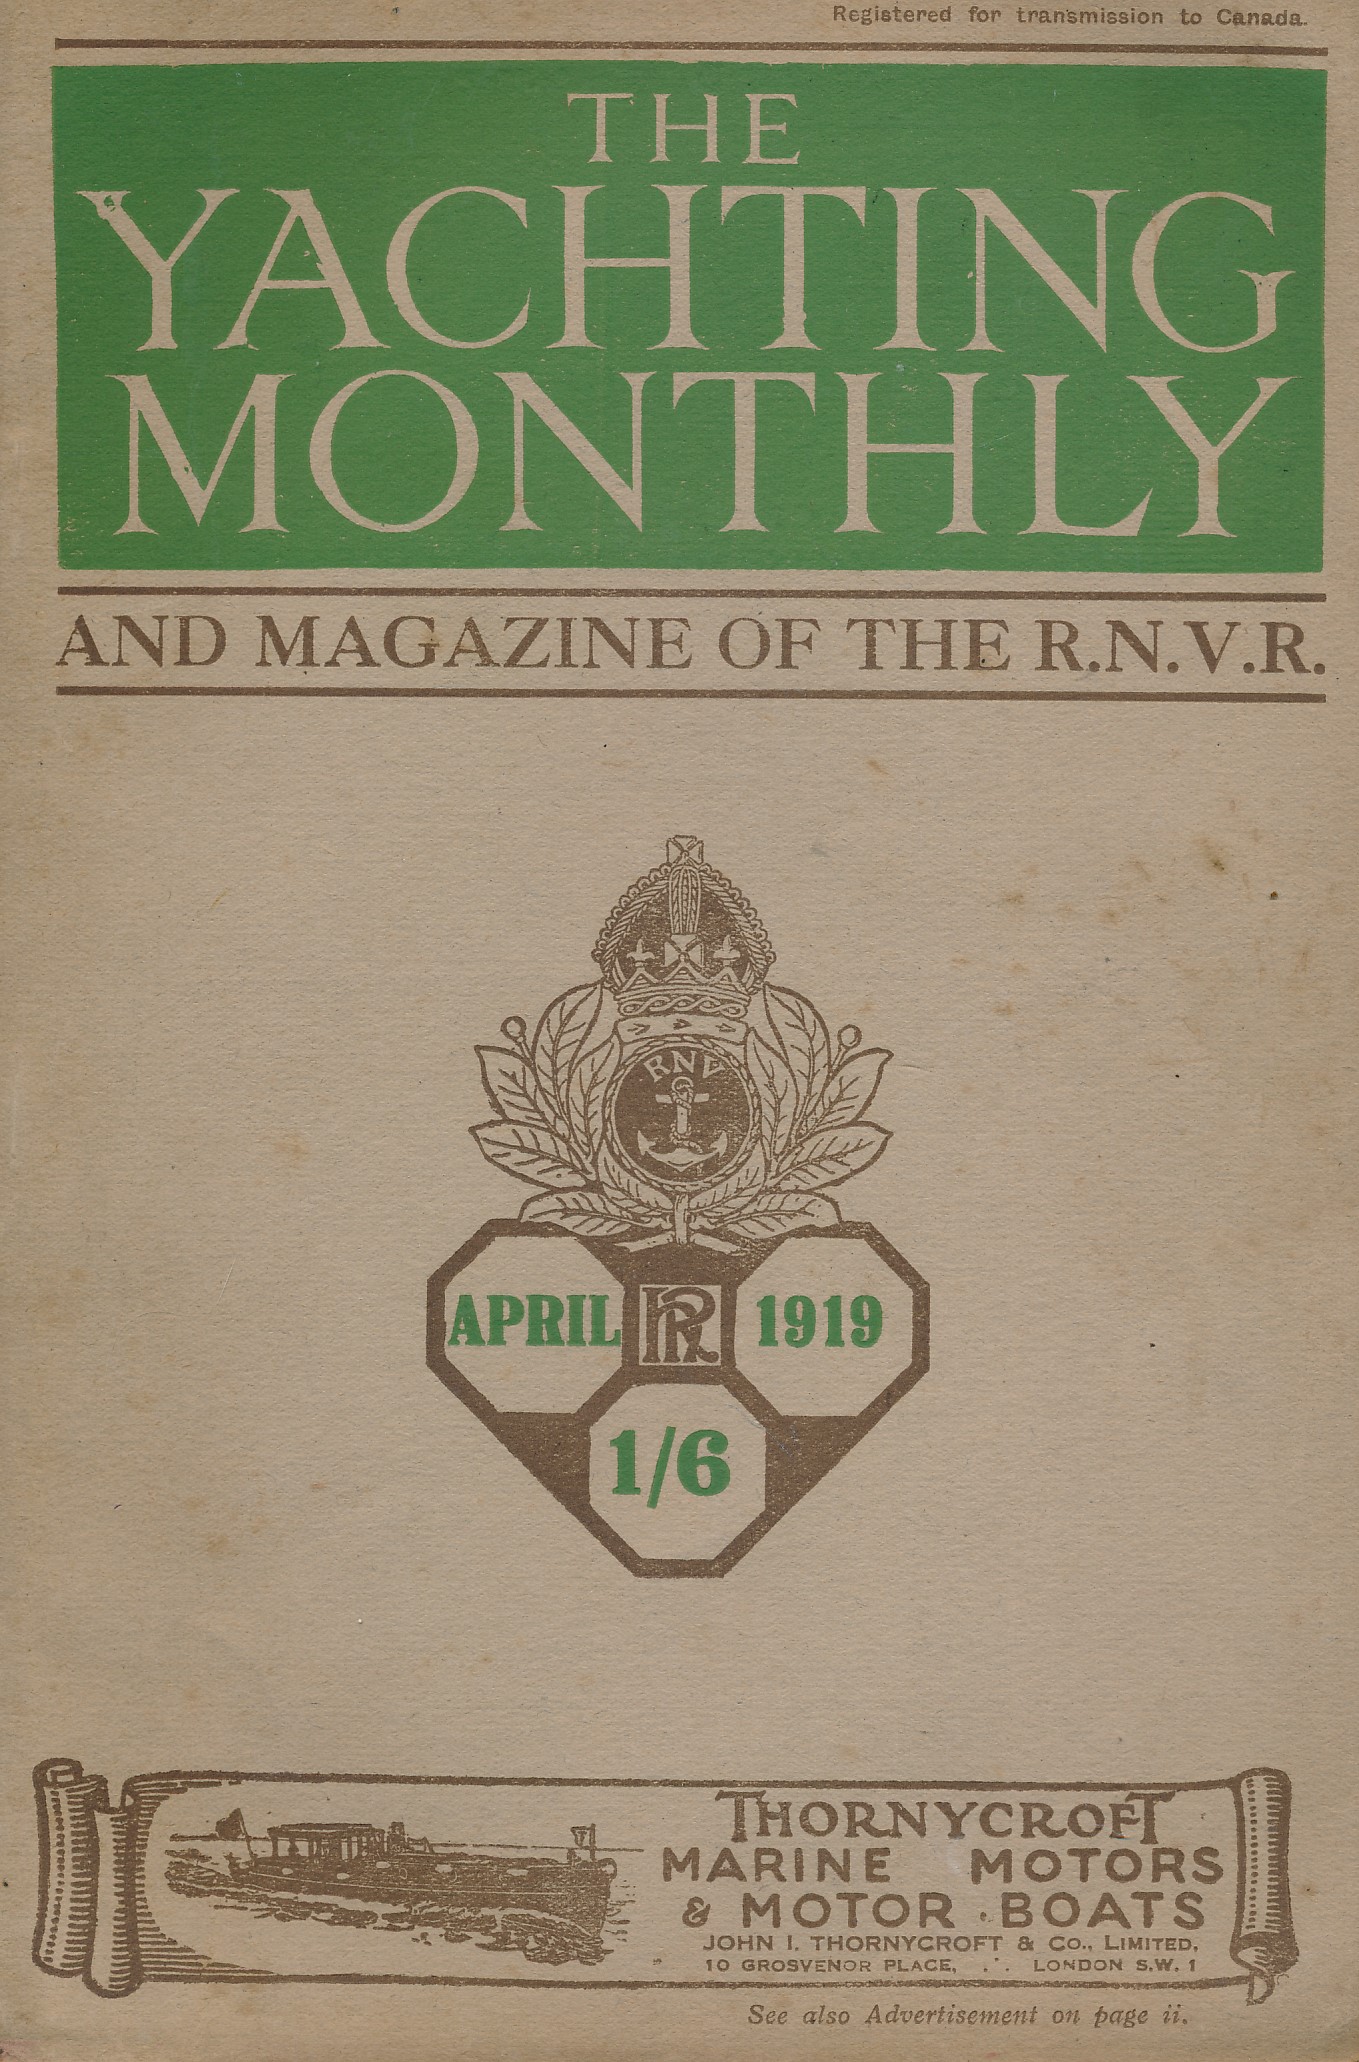 The Yachting Monthly and Magazine of the R.N.V.R.  Volume 156.- Vol. XXVI.  April, 1919.